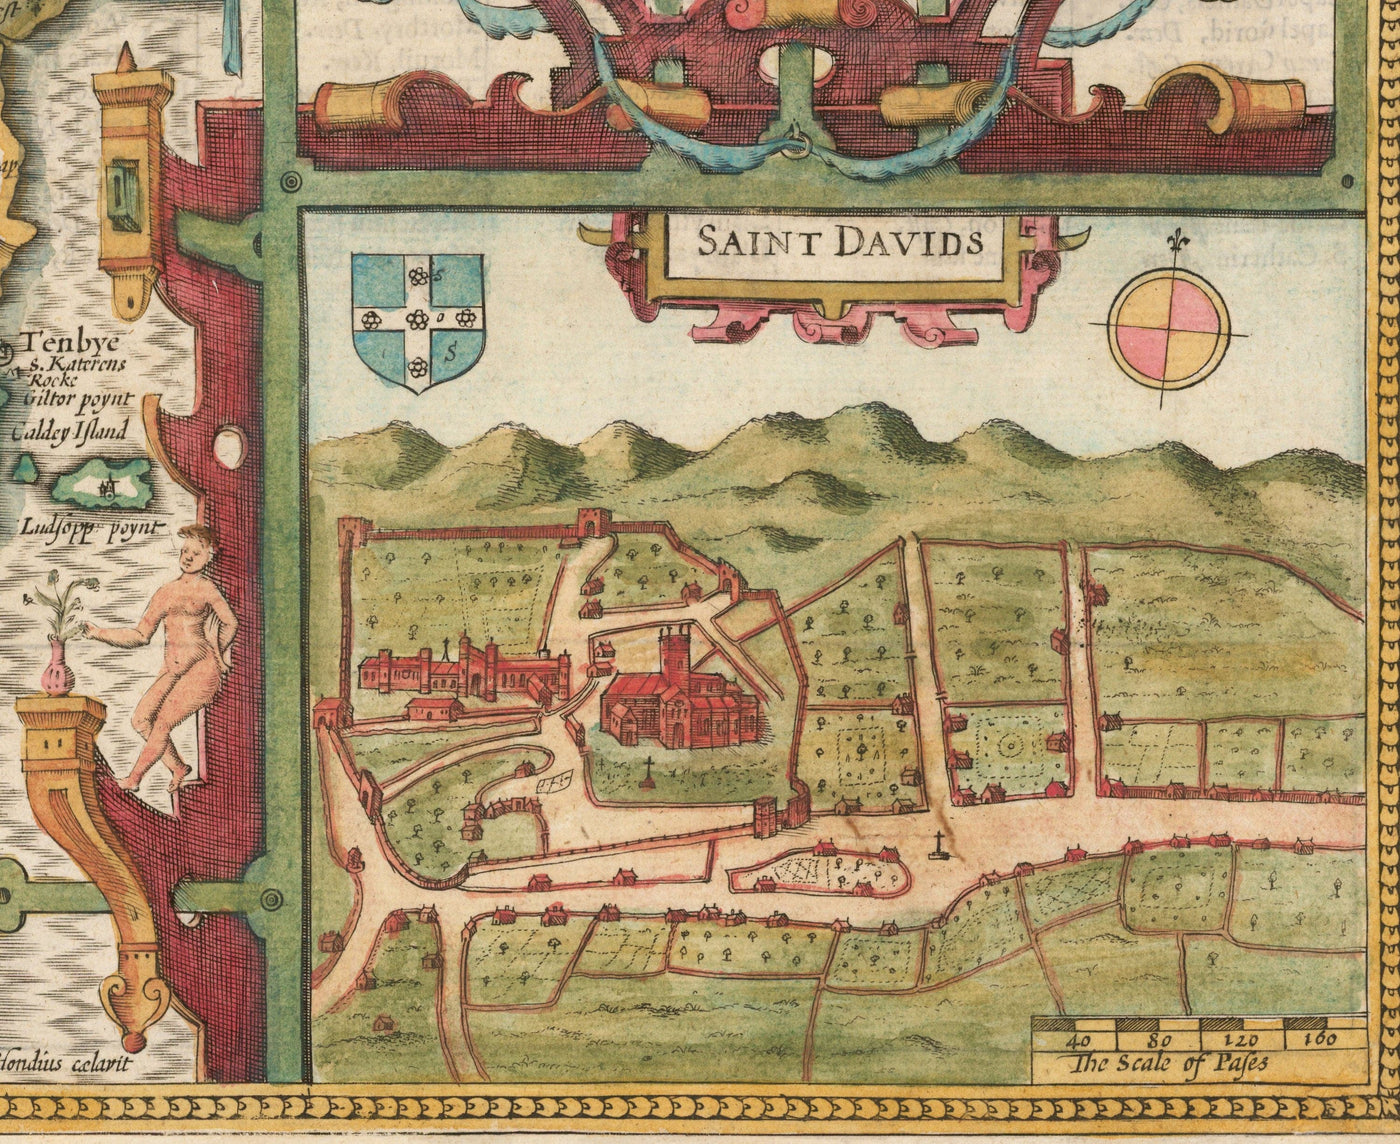 Old Map of Pembrokeshire Wales 1611 John Speed - Haverfordwest, St Davids, Fishguard